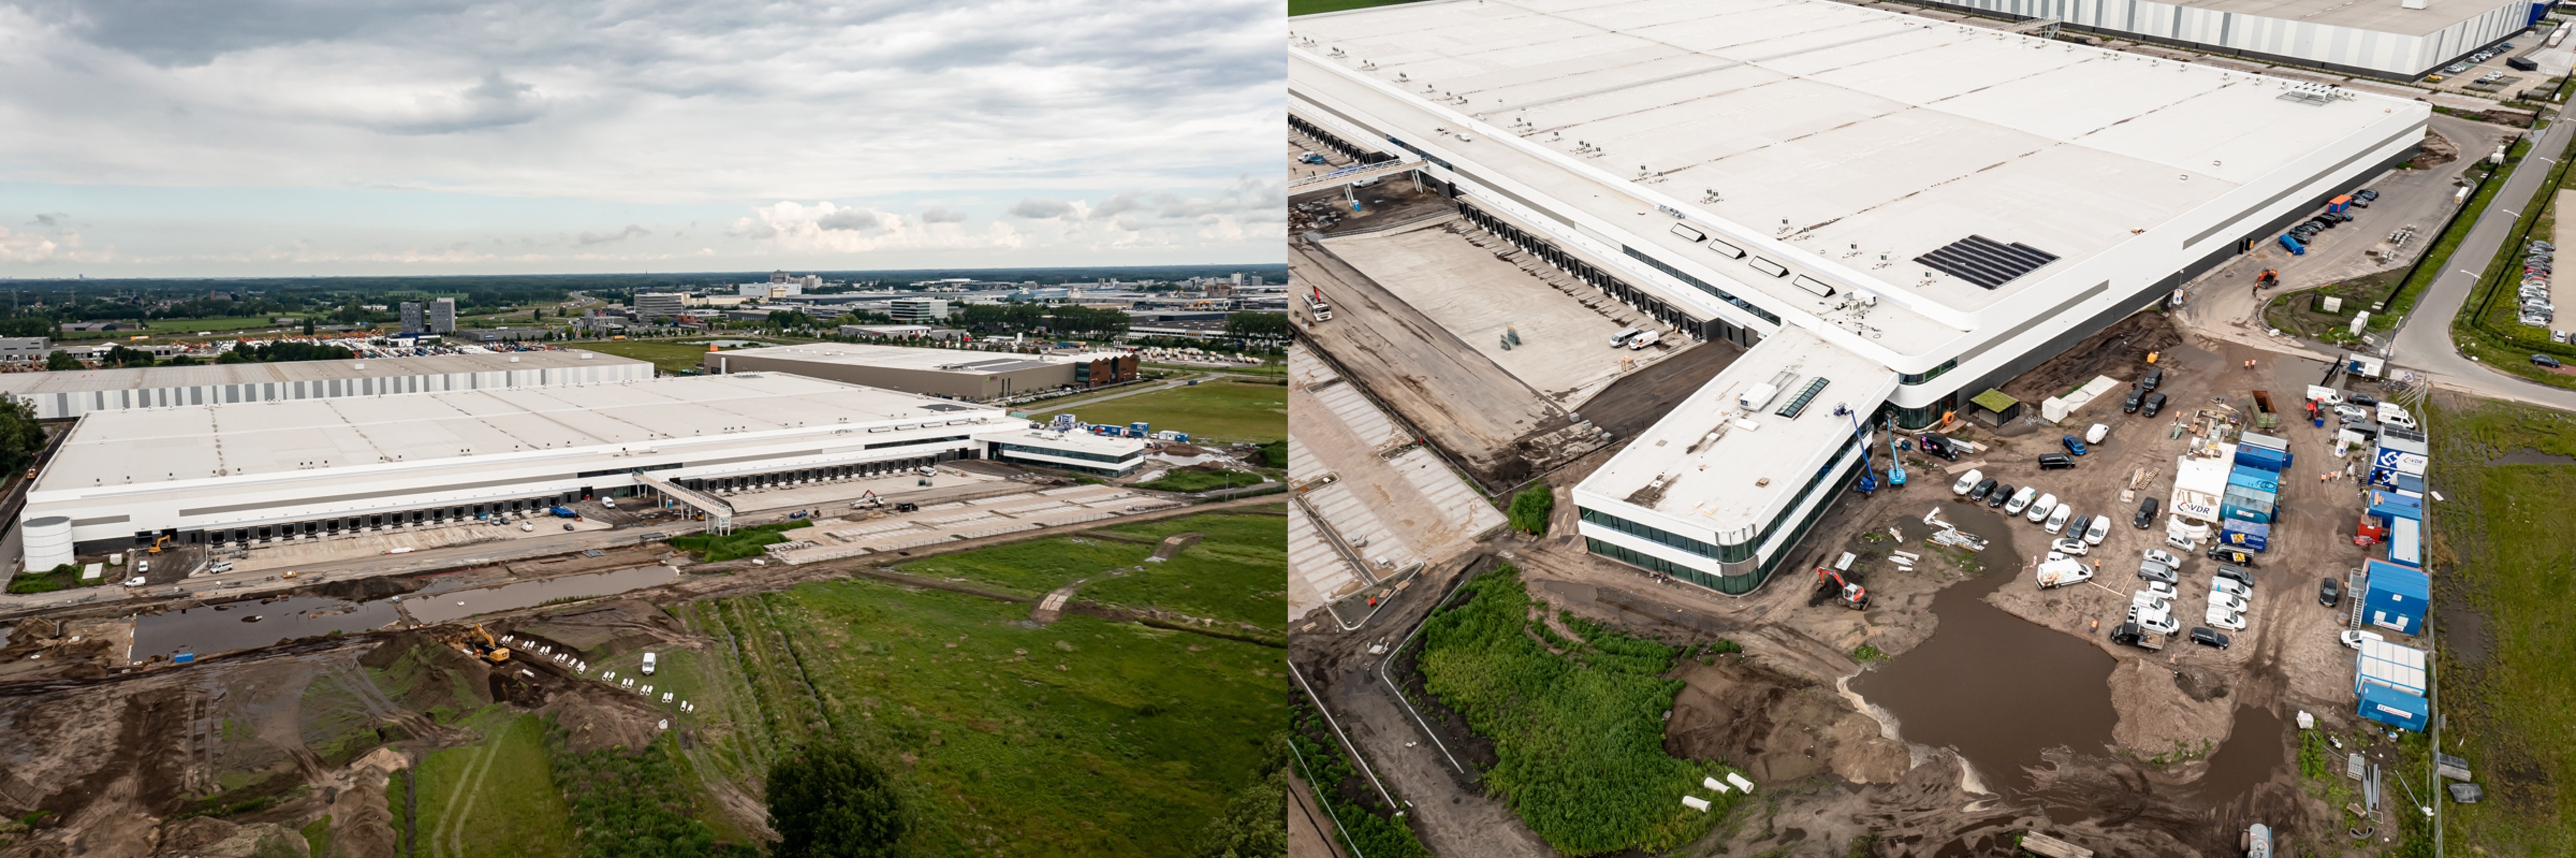 Alliance Healthcare Campus luchtfoto 4